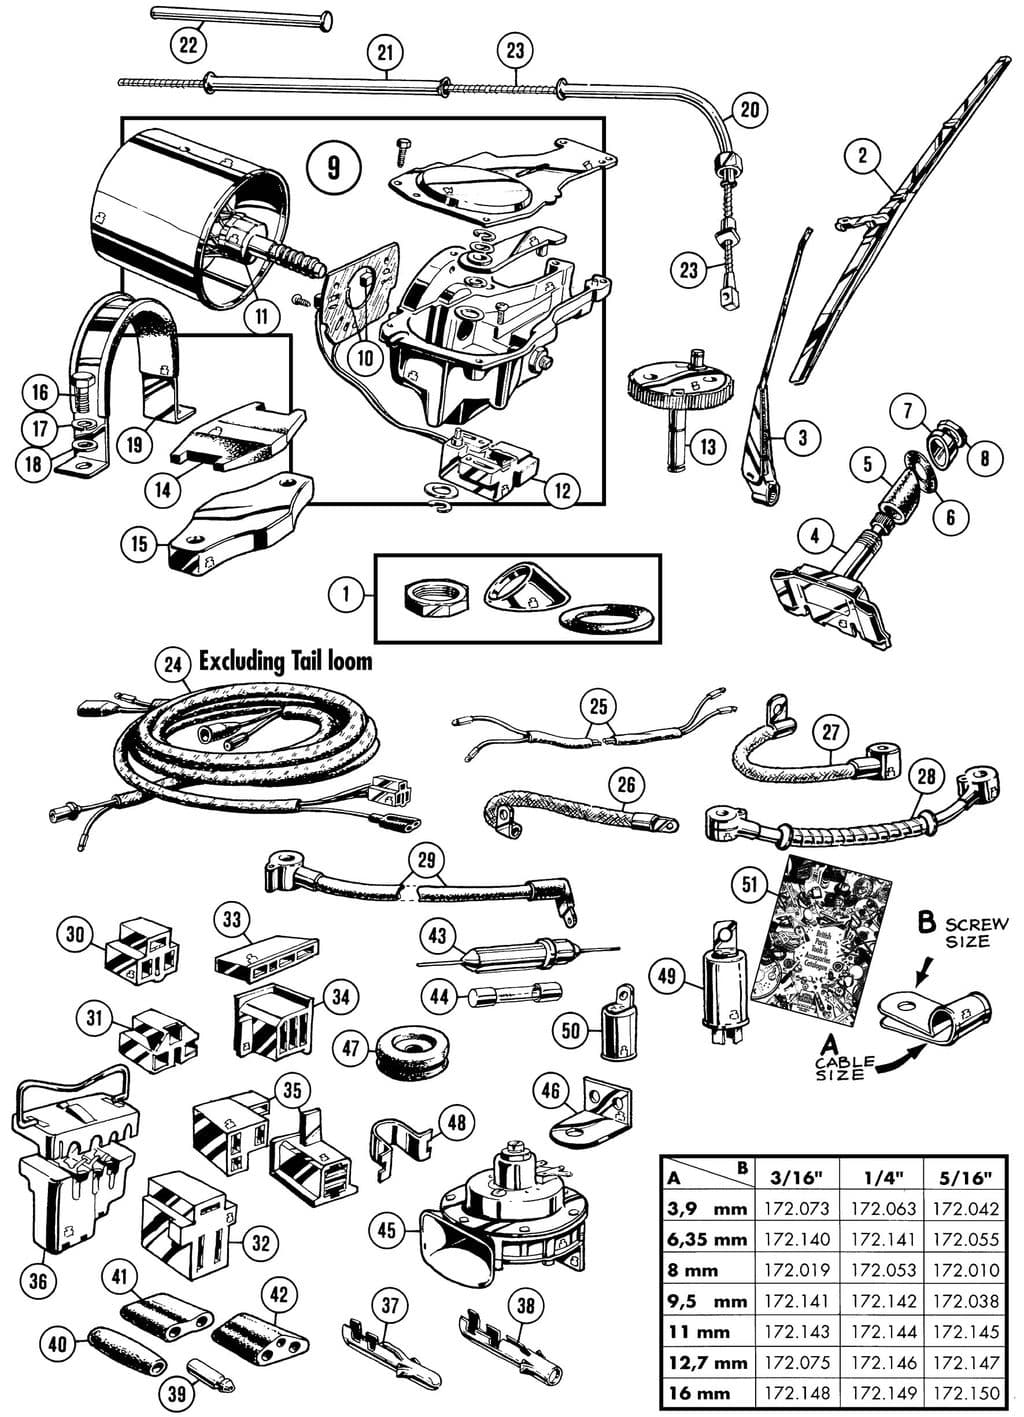 MGC 1967-1969 - Wires & electrical cabling - Wiper motor & wiring - 1